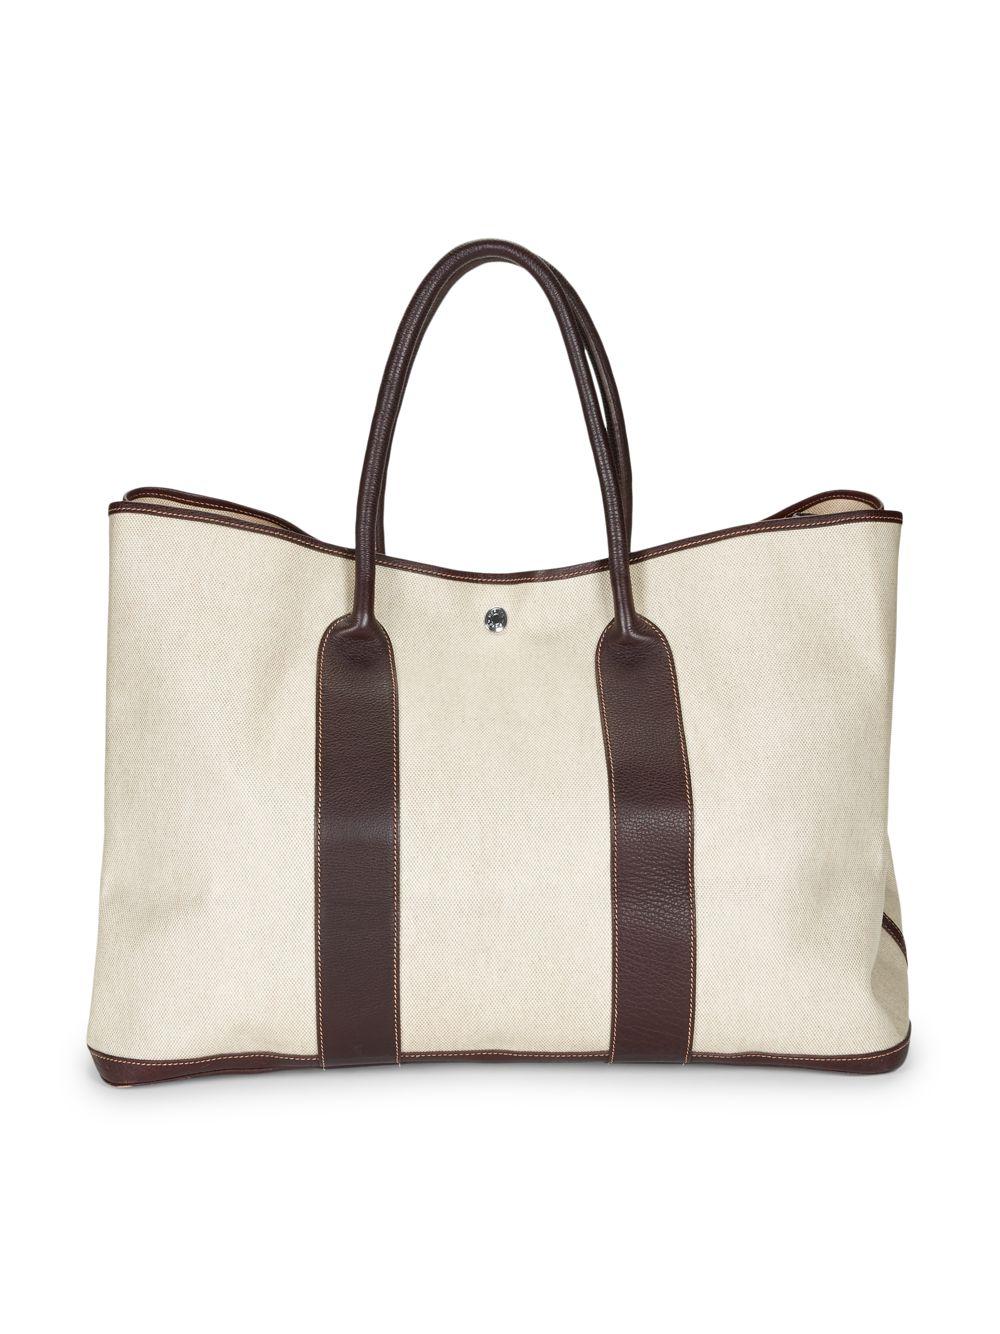 Hermès Vintage Garden Party Leather-trim Canvas Tote in Natural